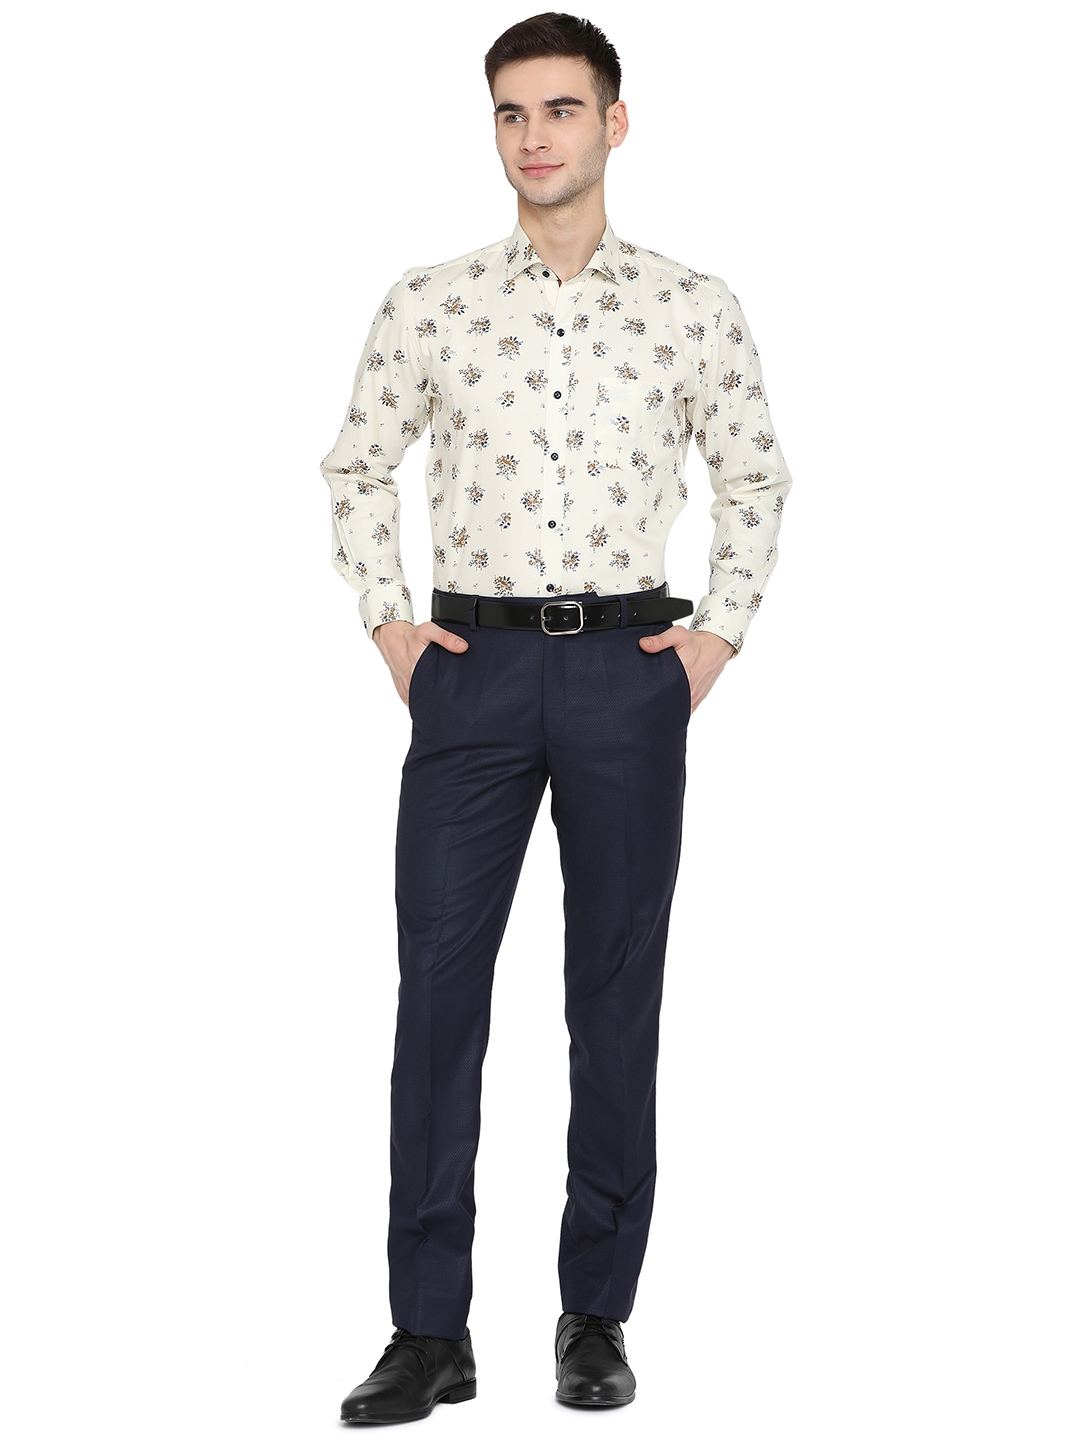 Greenfibre | Cream Printed Slim Fit Party Wear Shirt | Greenfibre 3